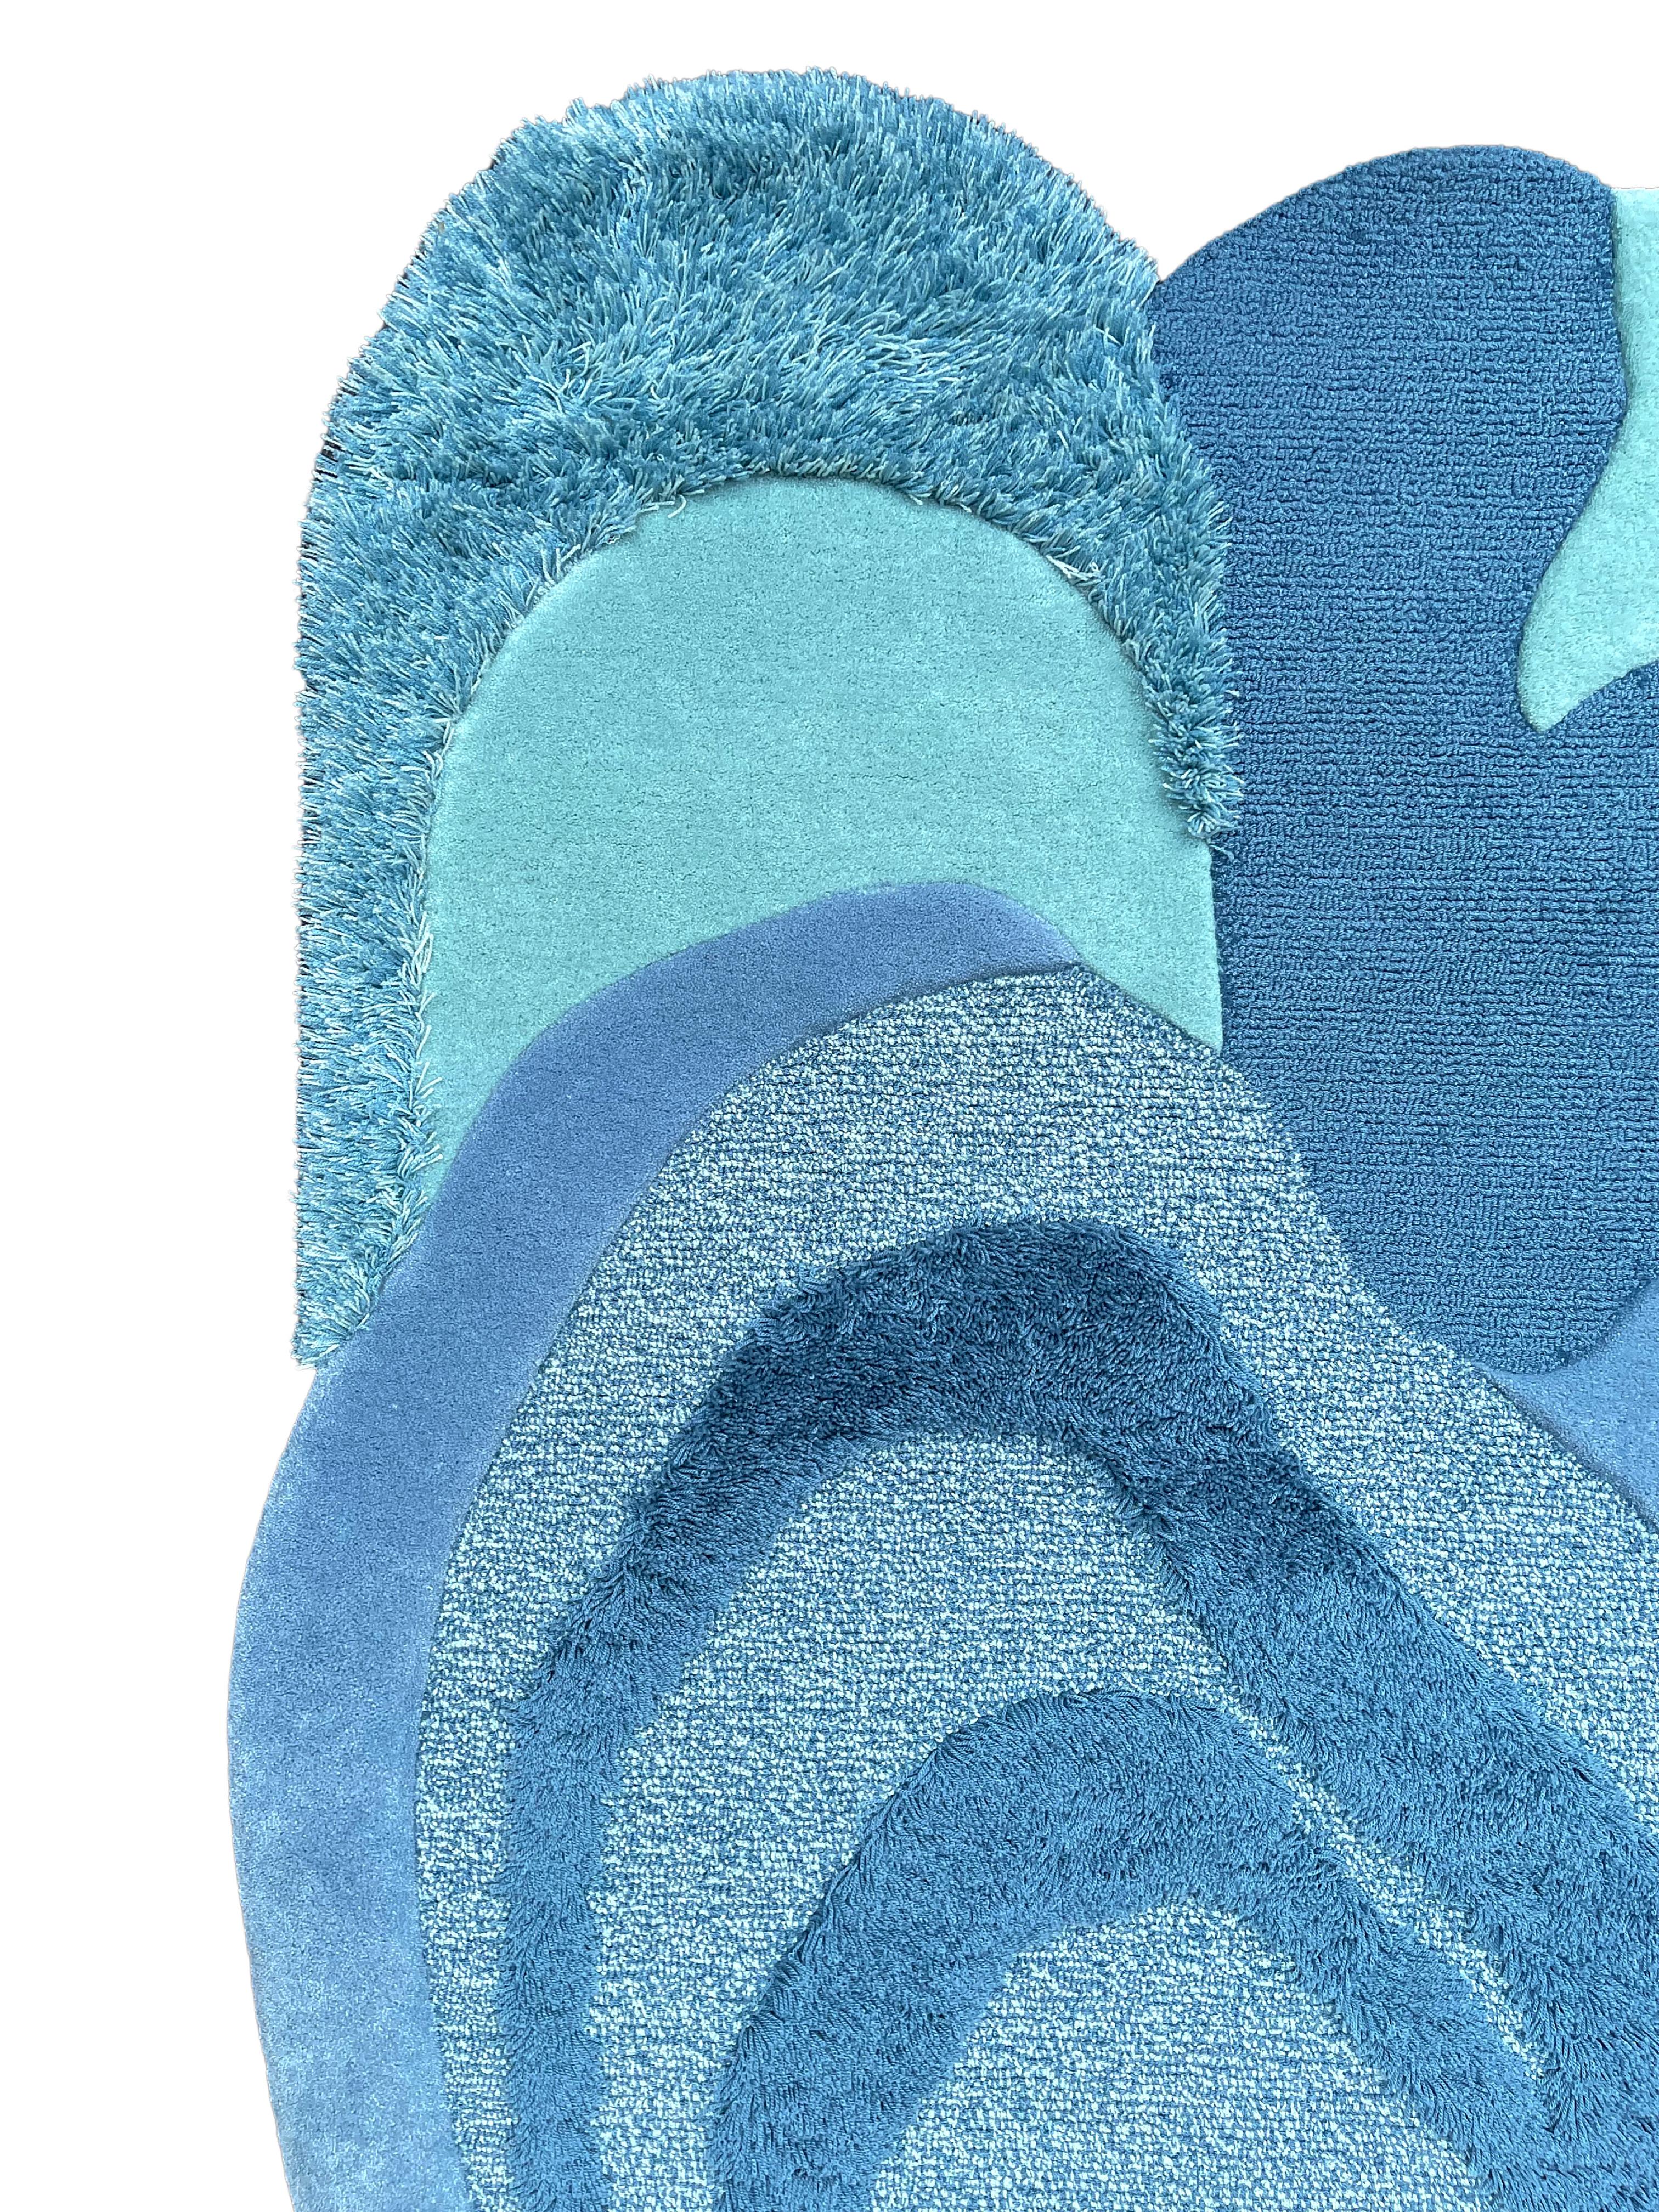 Modern Style Carpet in blue by Rag Home

A rug inspired by currents of the ocean and Cumulonimbus; sources of water - the very essence of life. Replicate sensations of flowing water and the tranquility that comes with it in your room.

RAG under